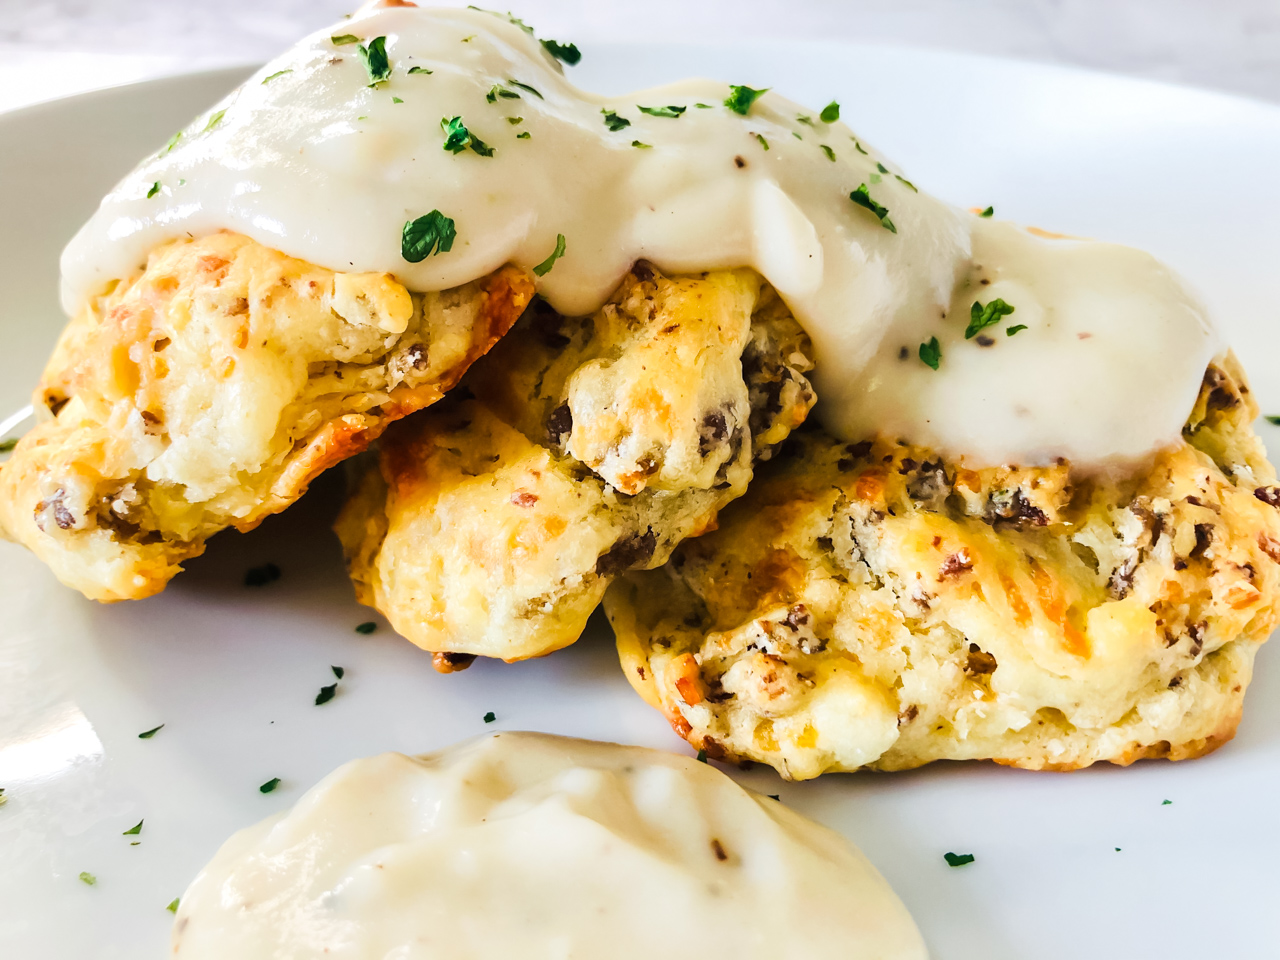 Cheddar and sausage biscuits with gravy.